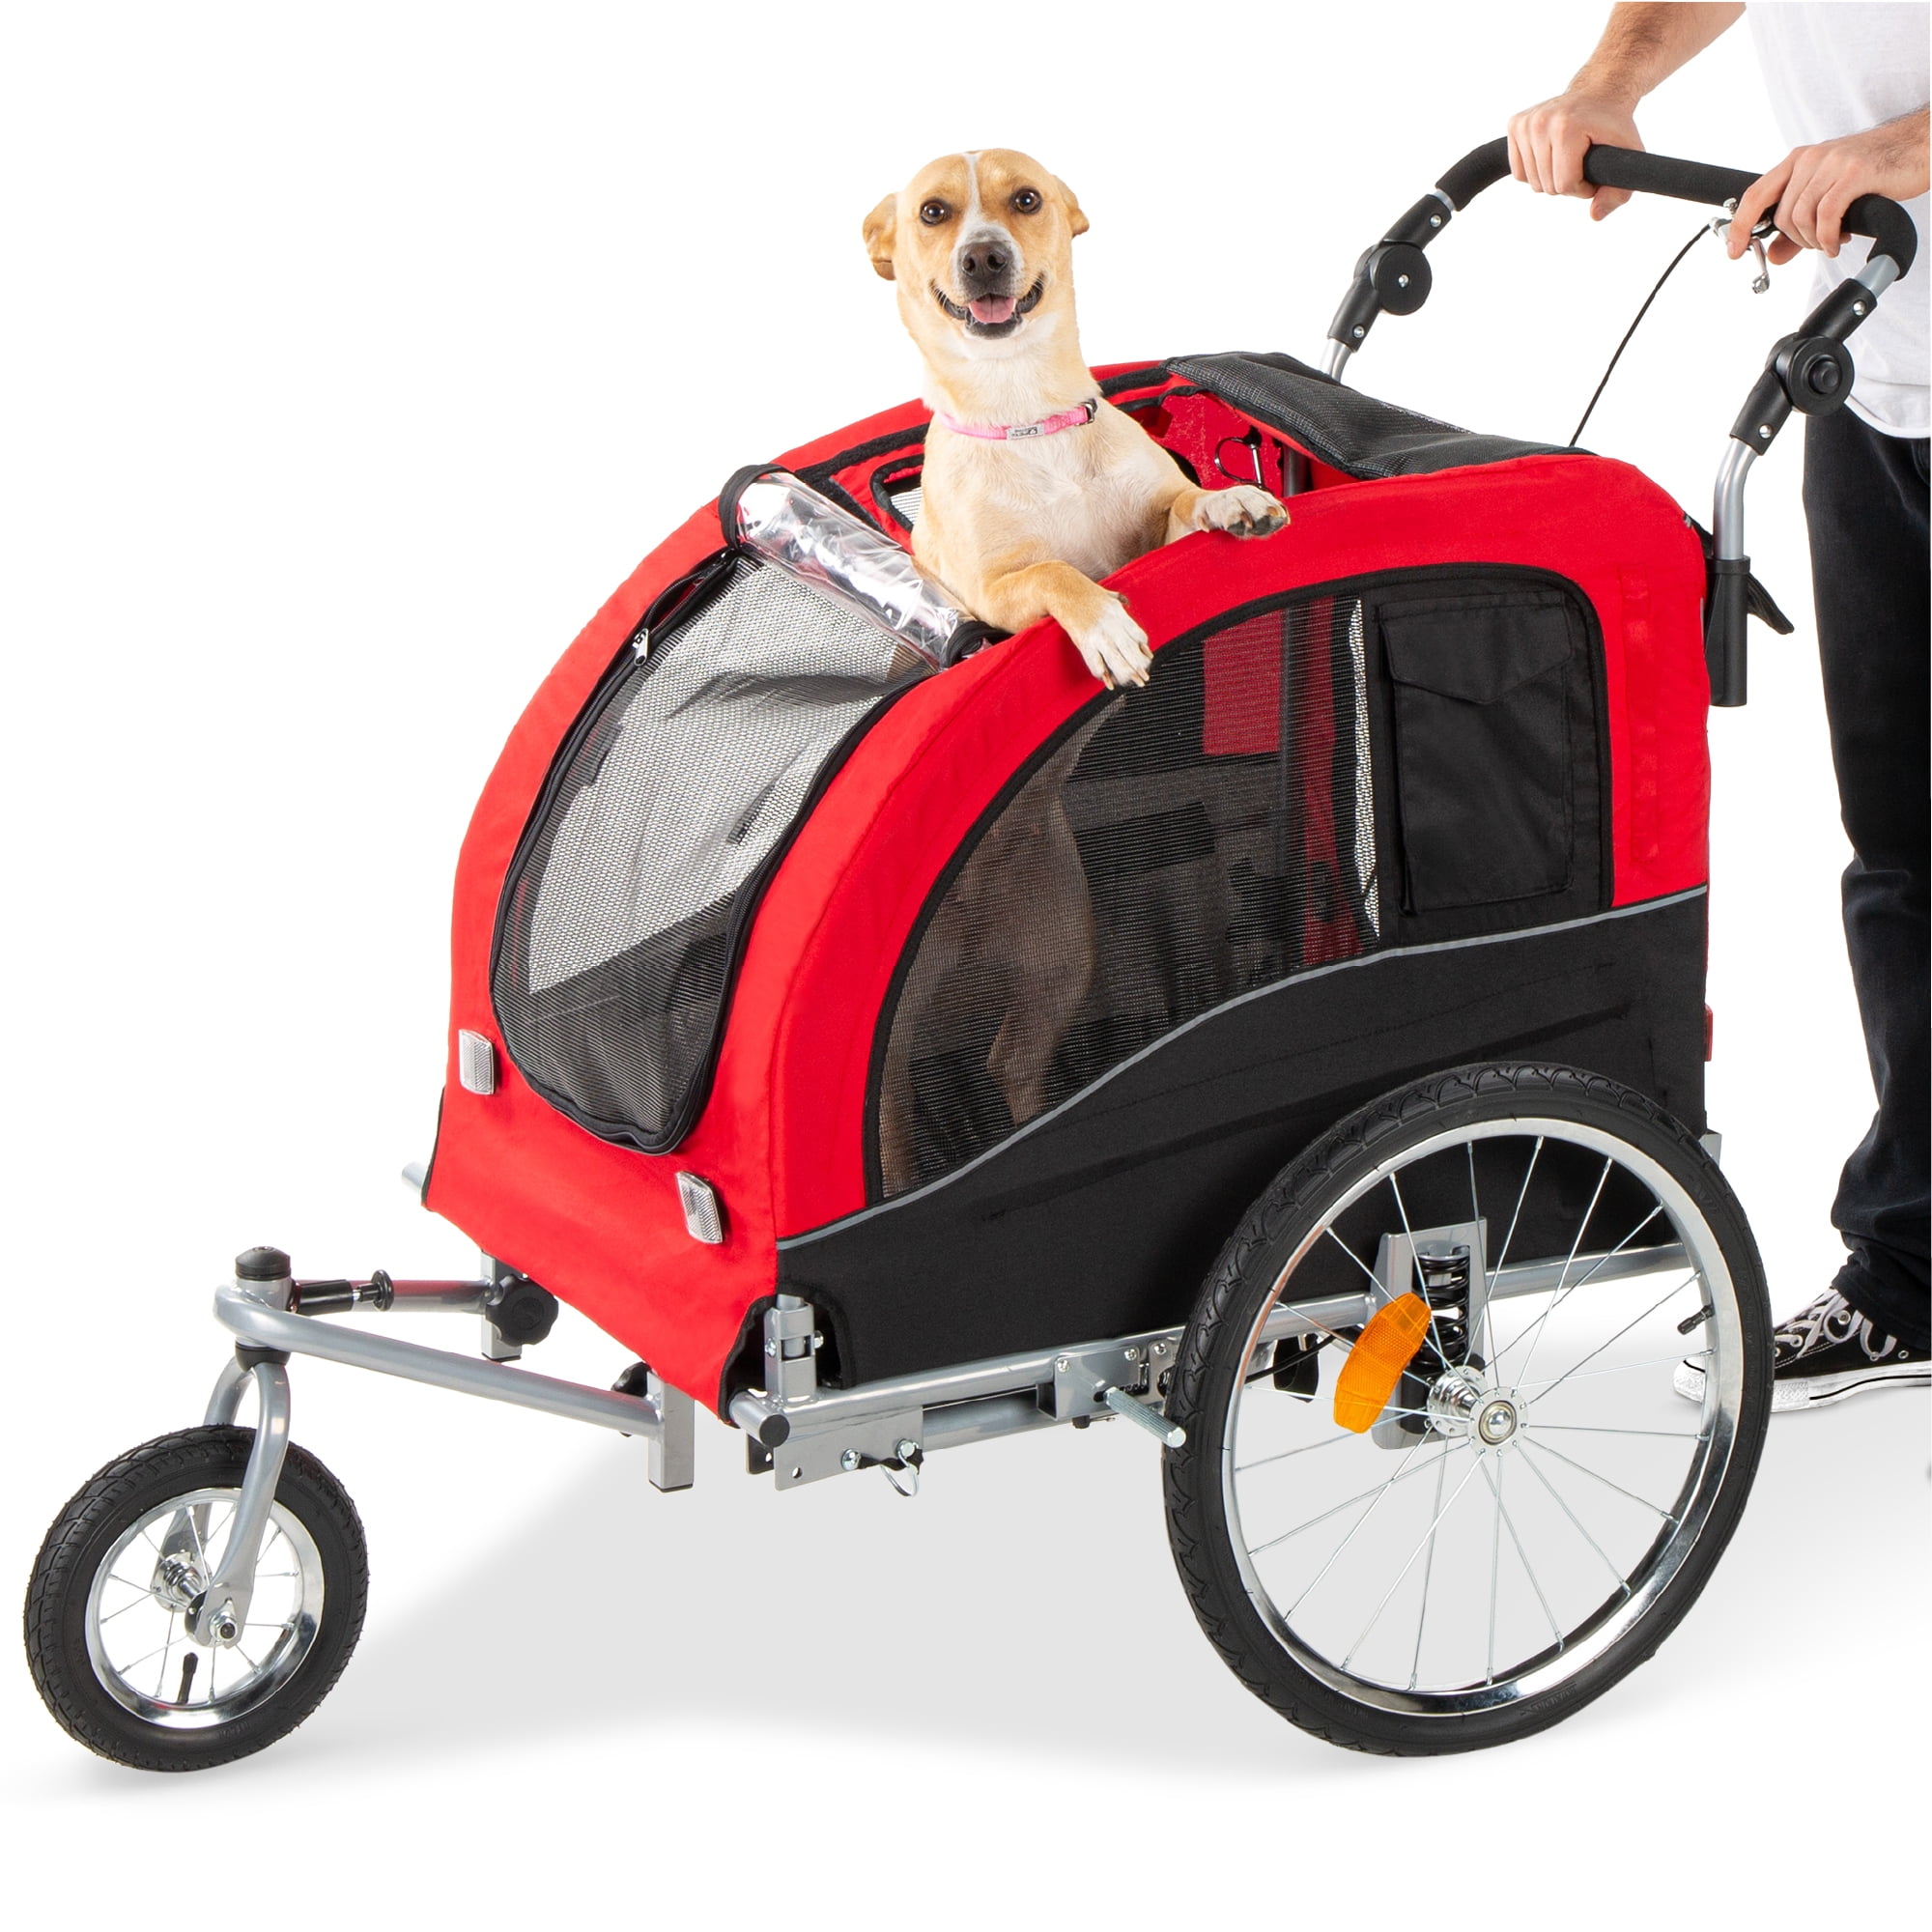 Best Choice Products 2-in-1 Dog Bike Trailer, Pet Stroller Bicycle Carrier  w/ Hitch, Brakes, Visibility Flag, Reflector 